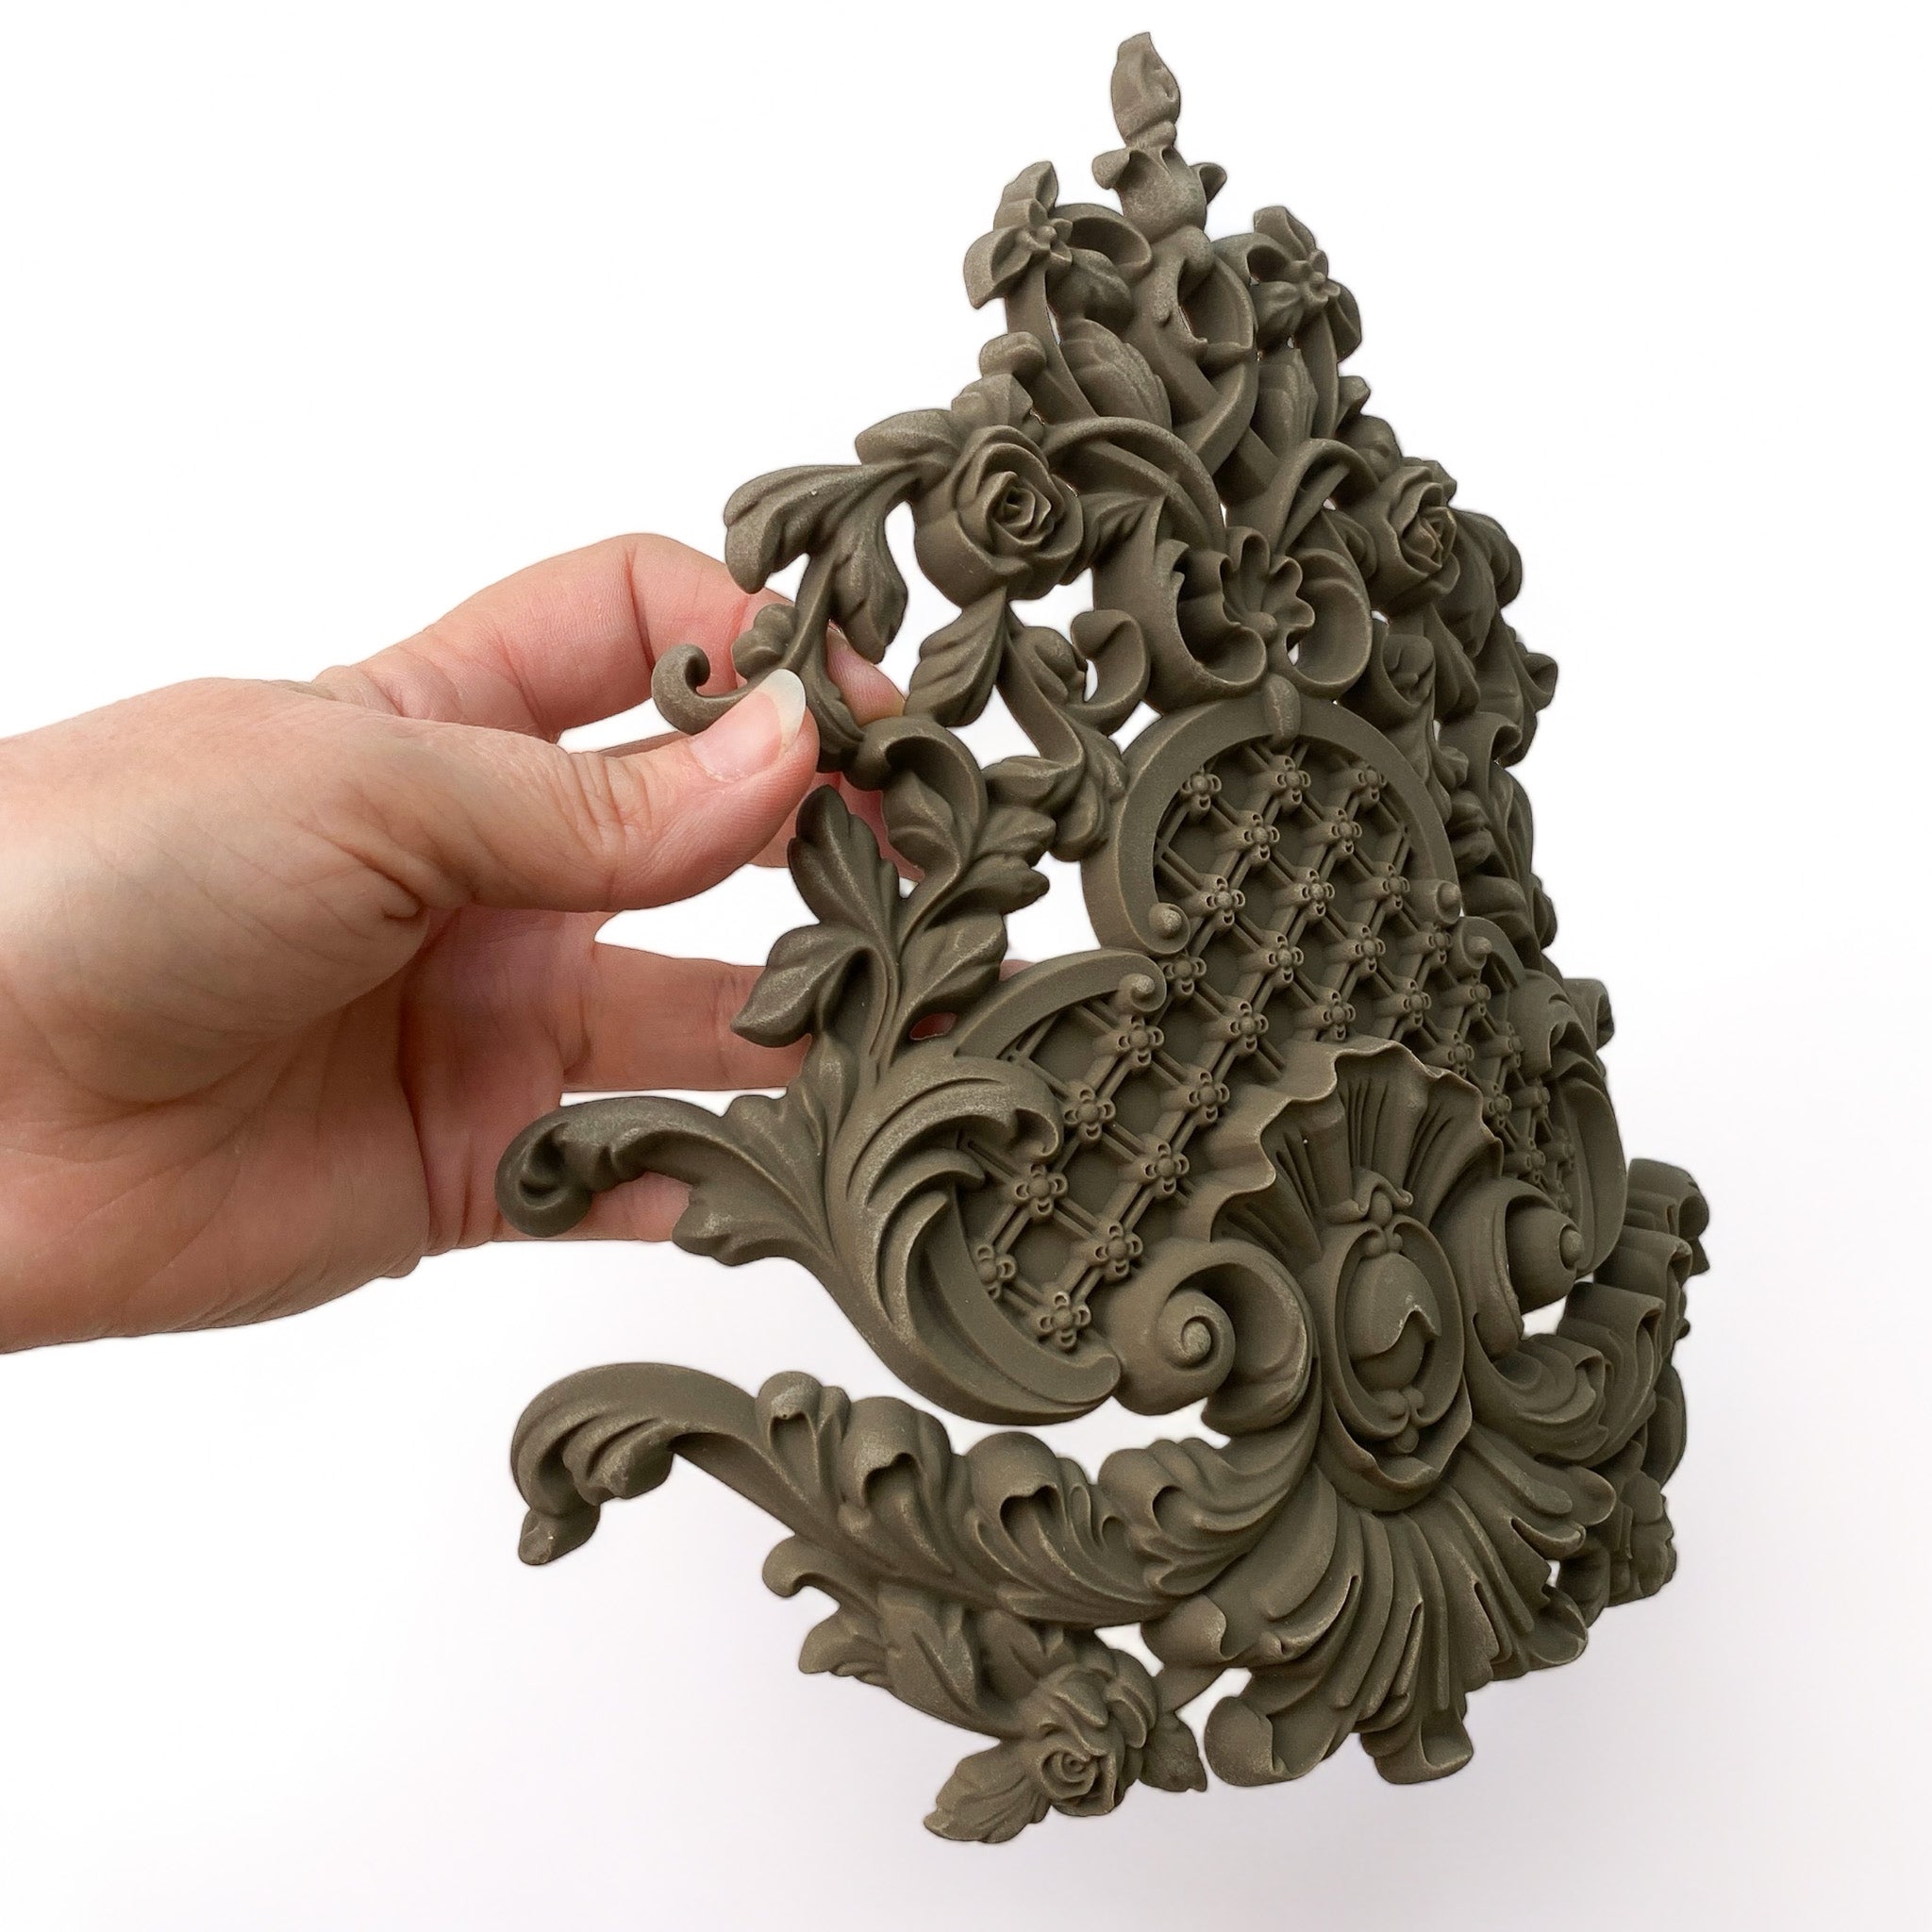 A hand is holding a curved bendable furniture applique of an intricate Baroque flourish with lattice against a white background.